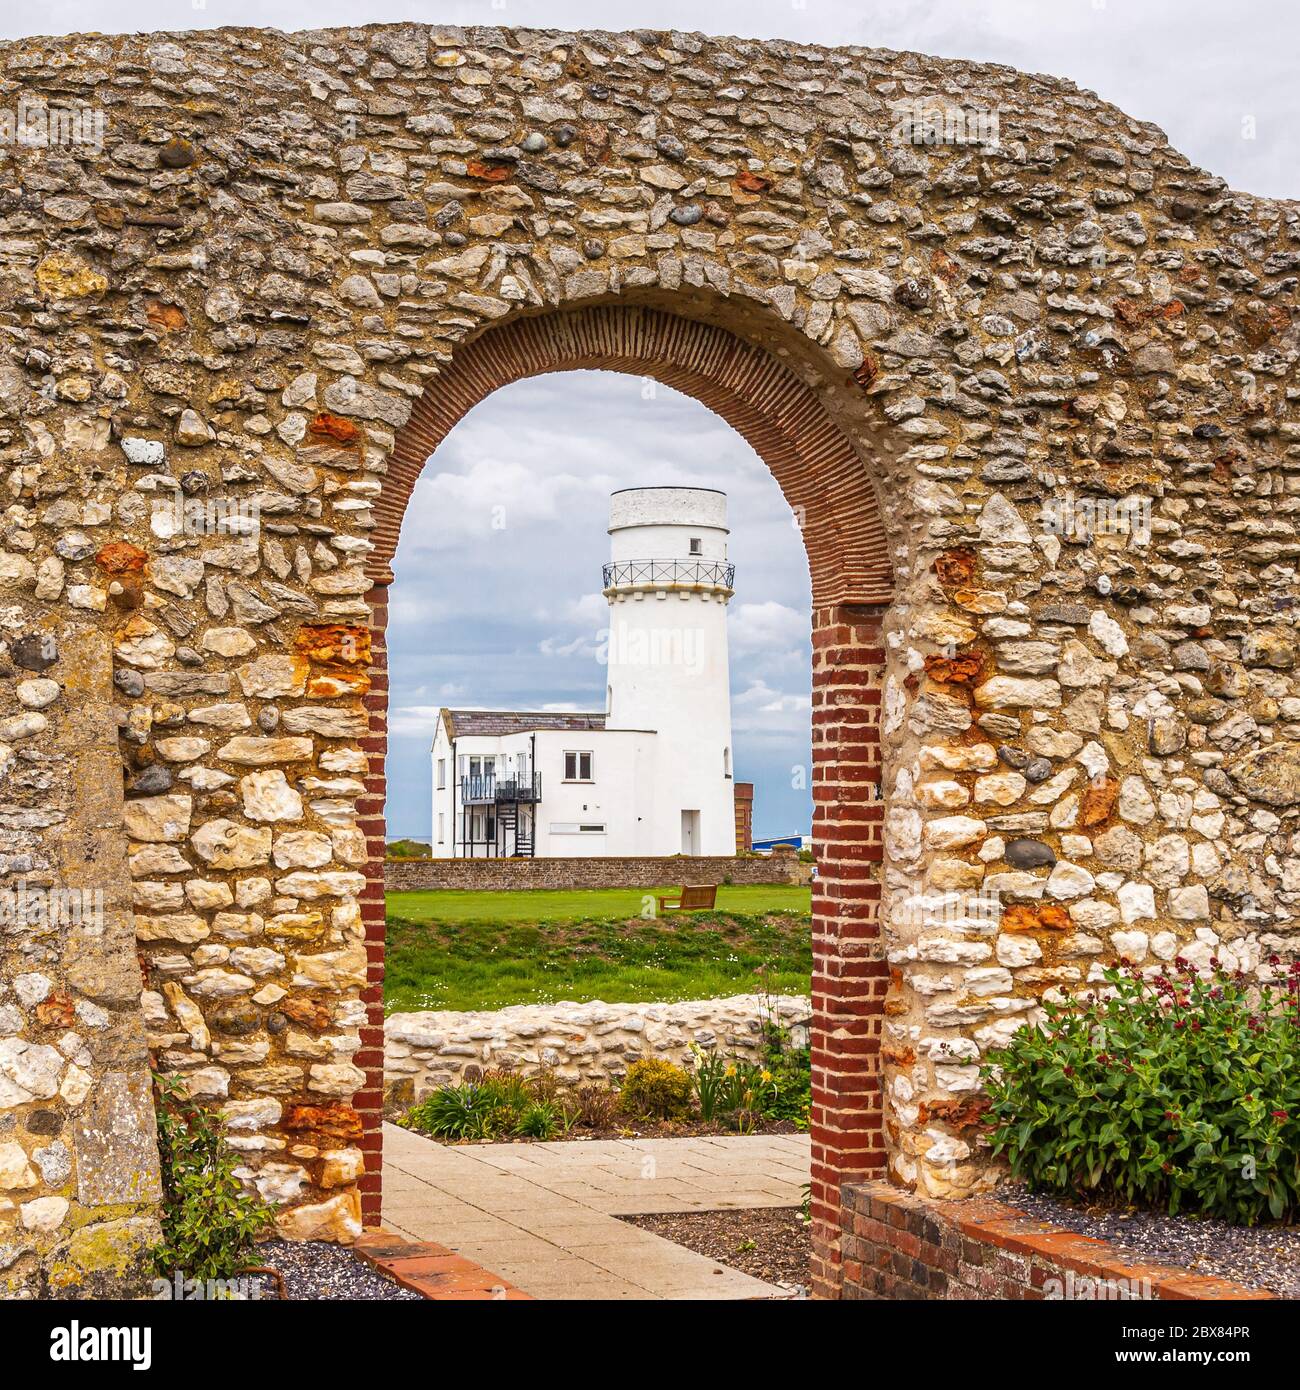 Hunstanton, Norfolk, England, UK, April 24, 2019: Hunstanton Lighthouse, built in 1840 in place of a previous one from the 17th century. Stock Photo